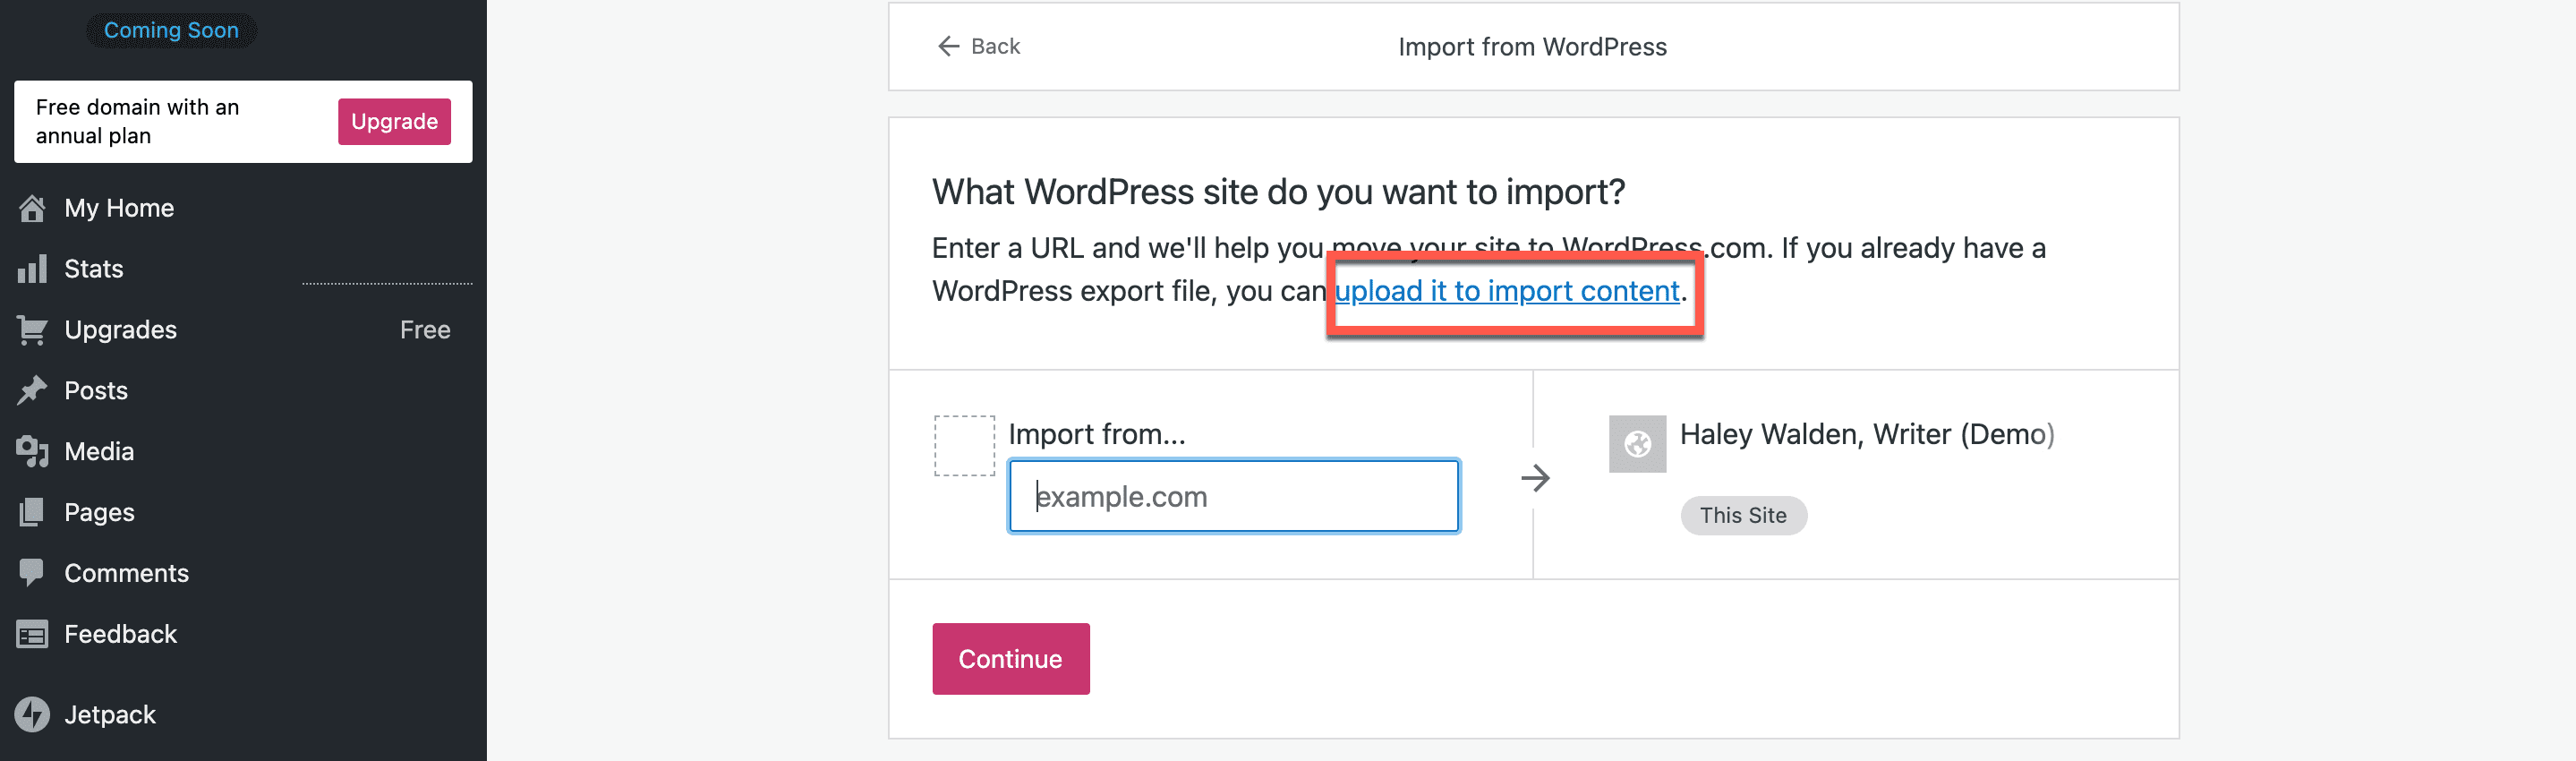 How to Use the WordPress Export Tool 8